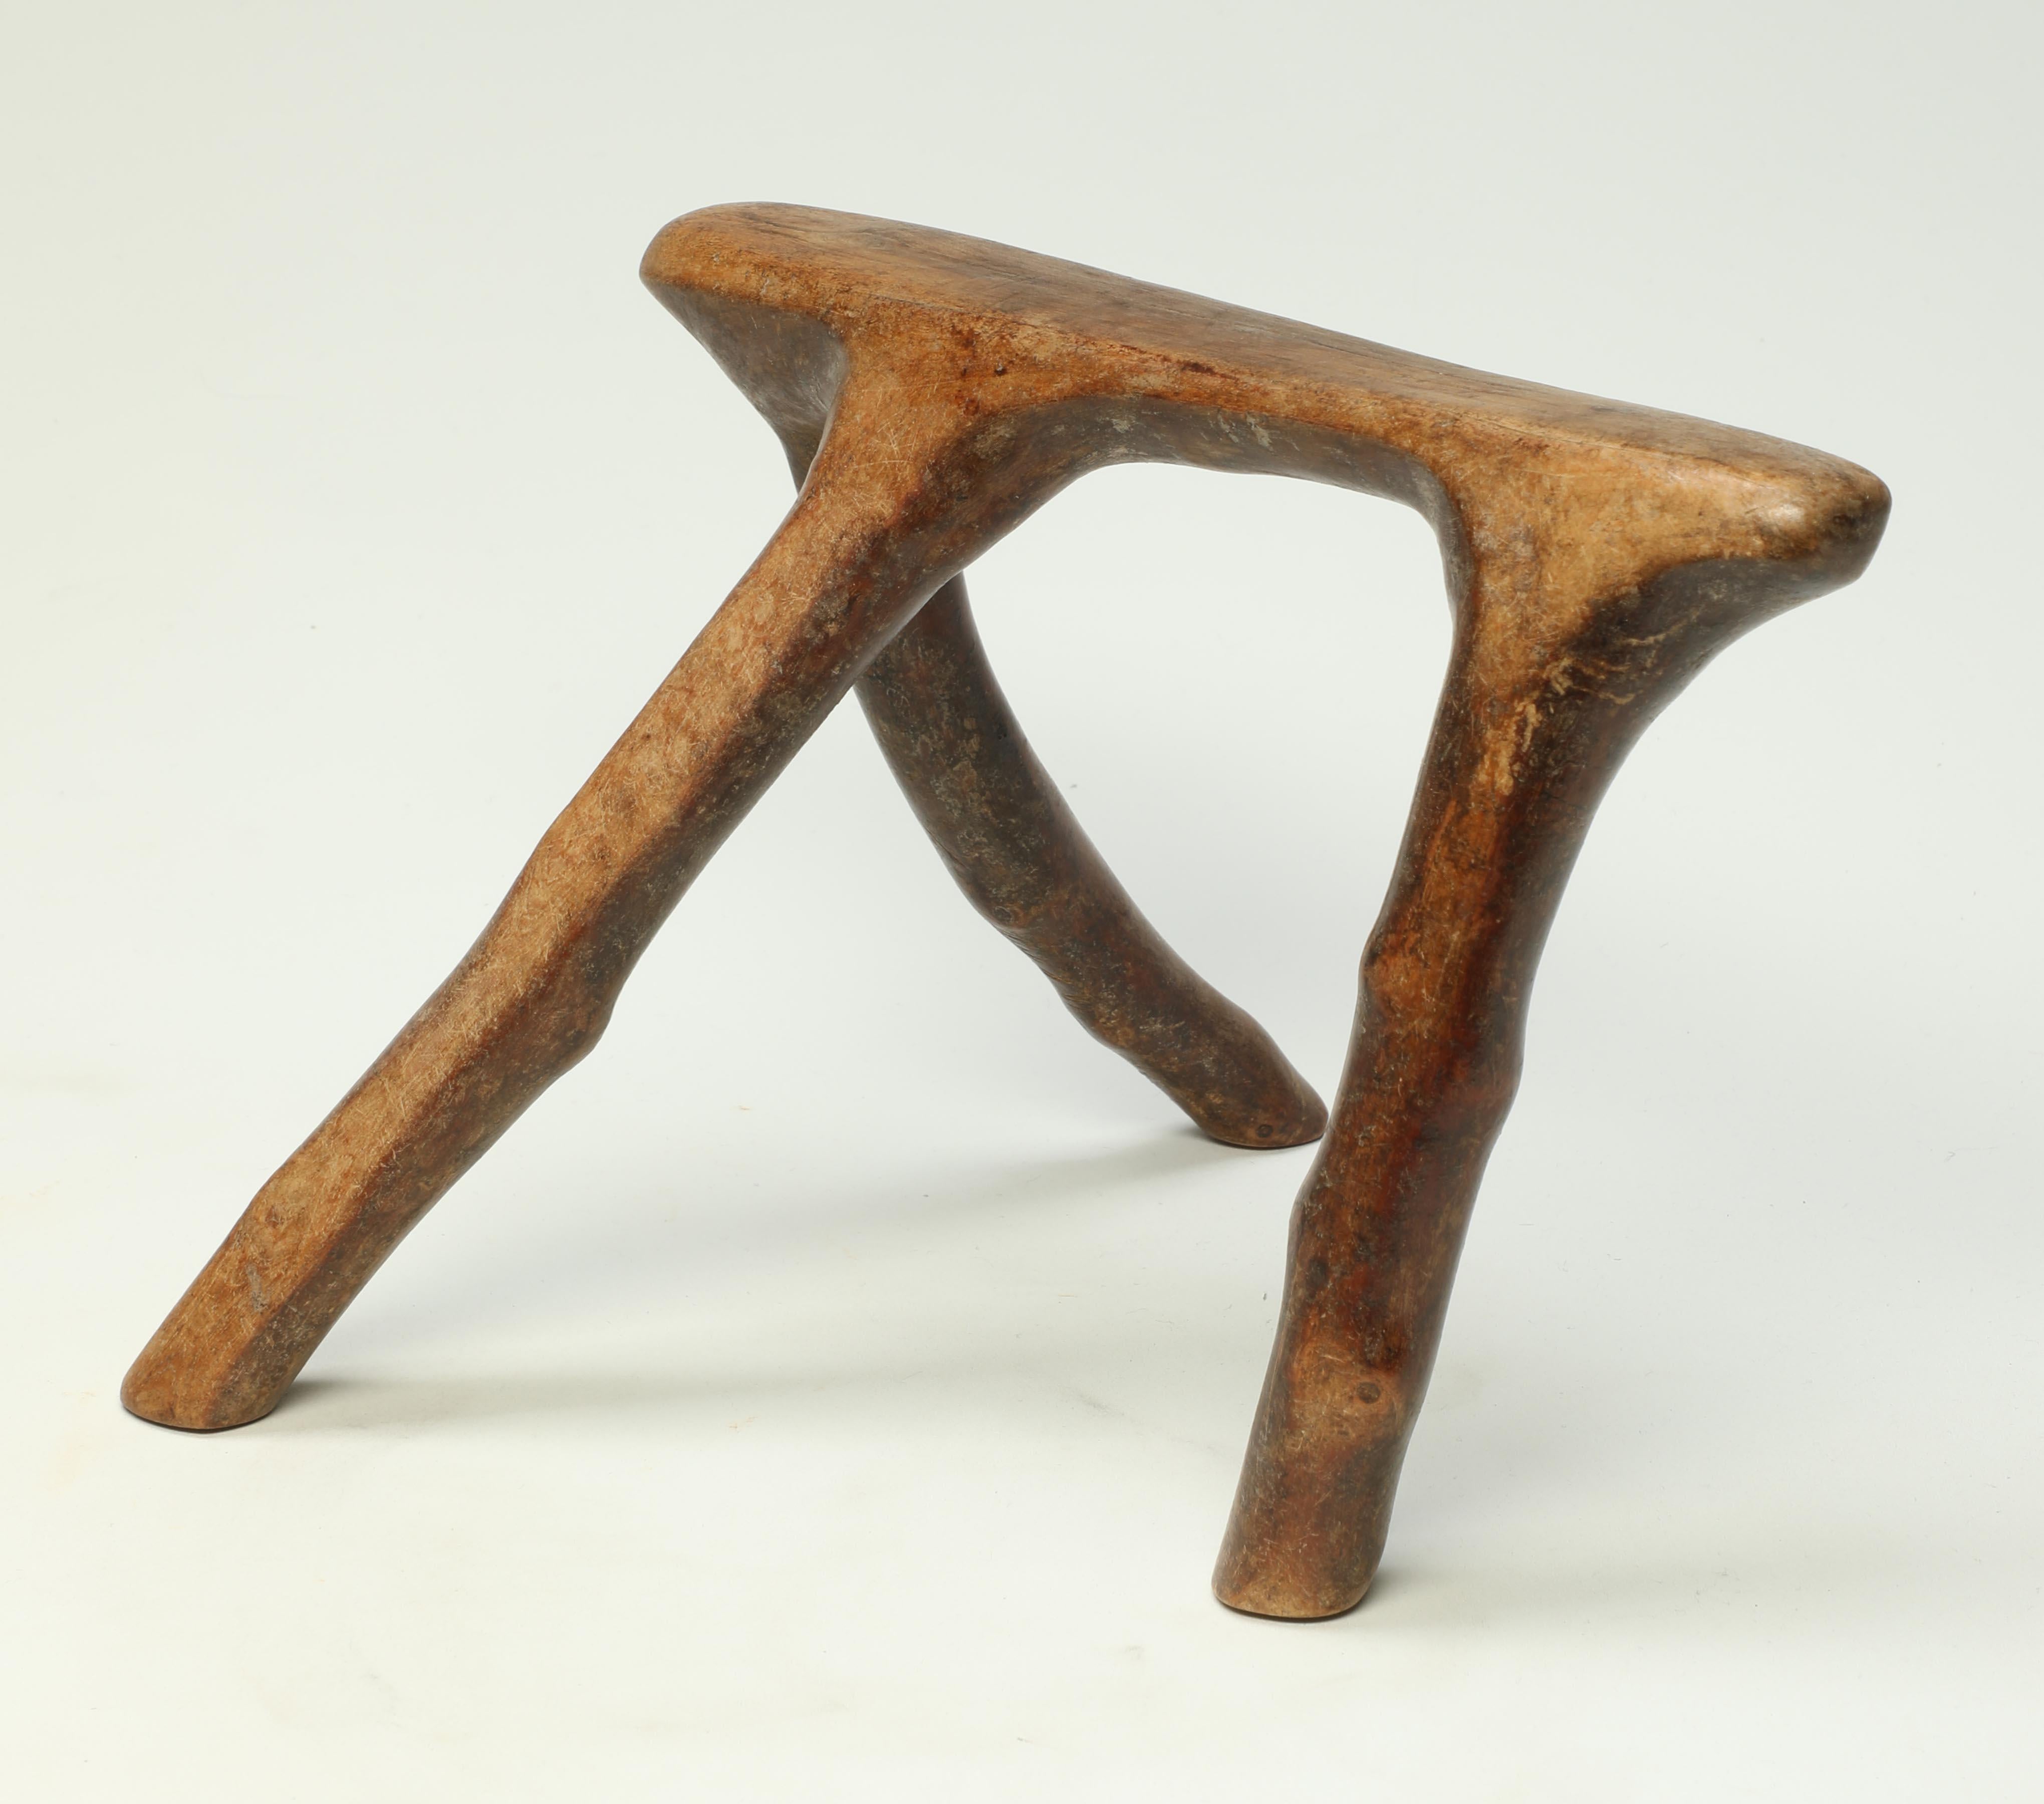 Kenya tribal wood headrest, stylized natural animal form, early 20th century, African.

Early Rendille or Borana Headrest from Kenya. Using naturally found branch connections to form a stylized three legged animal form, these headrests were a